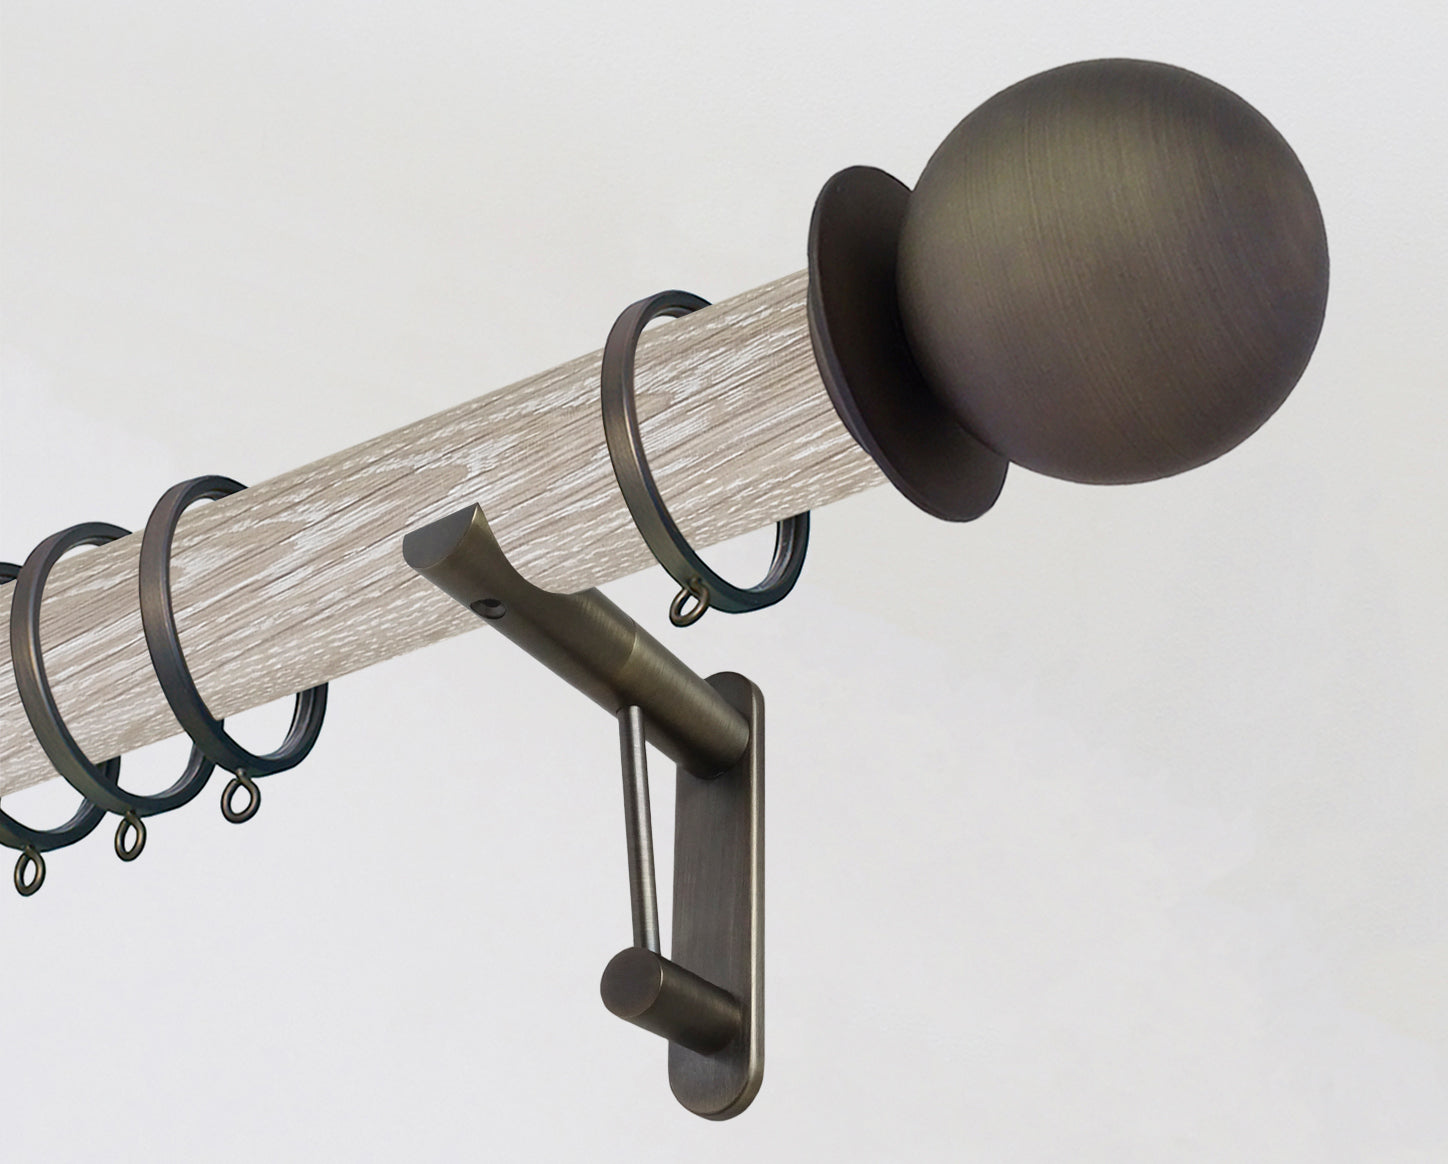 50mm dia. limed real oak wood curtain pole set with metal ball finials